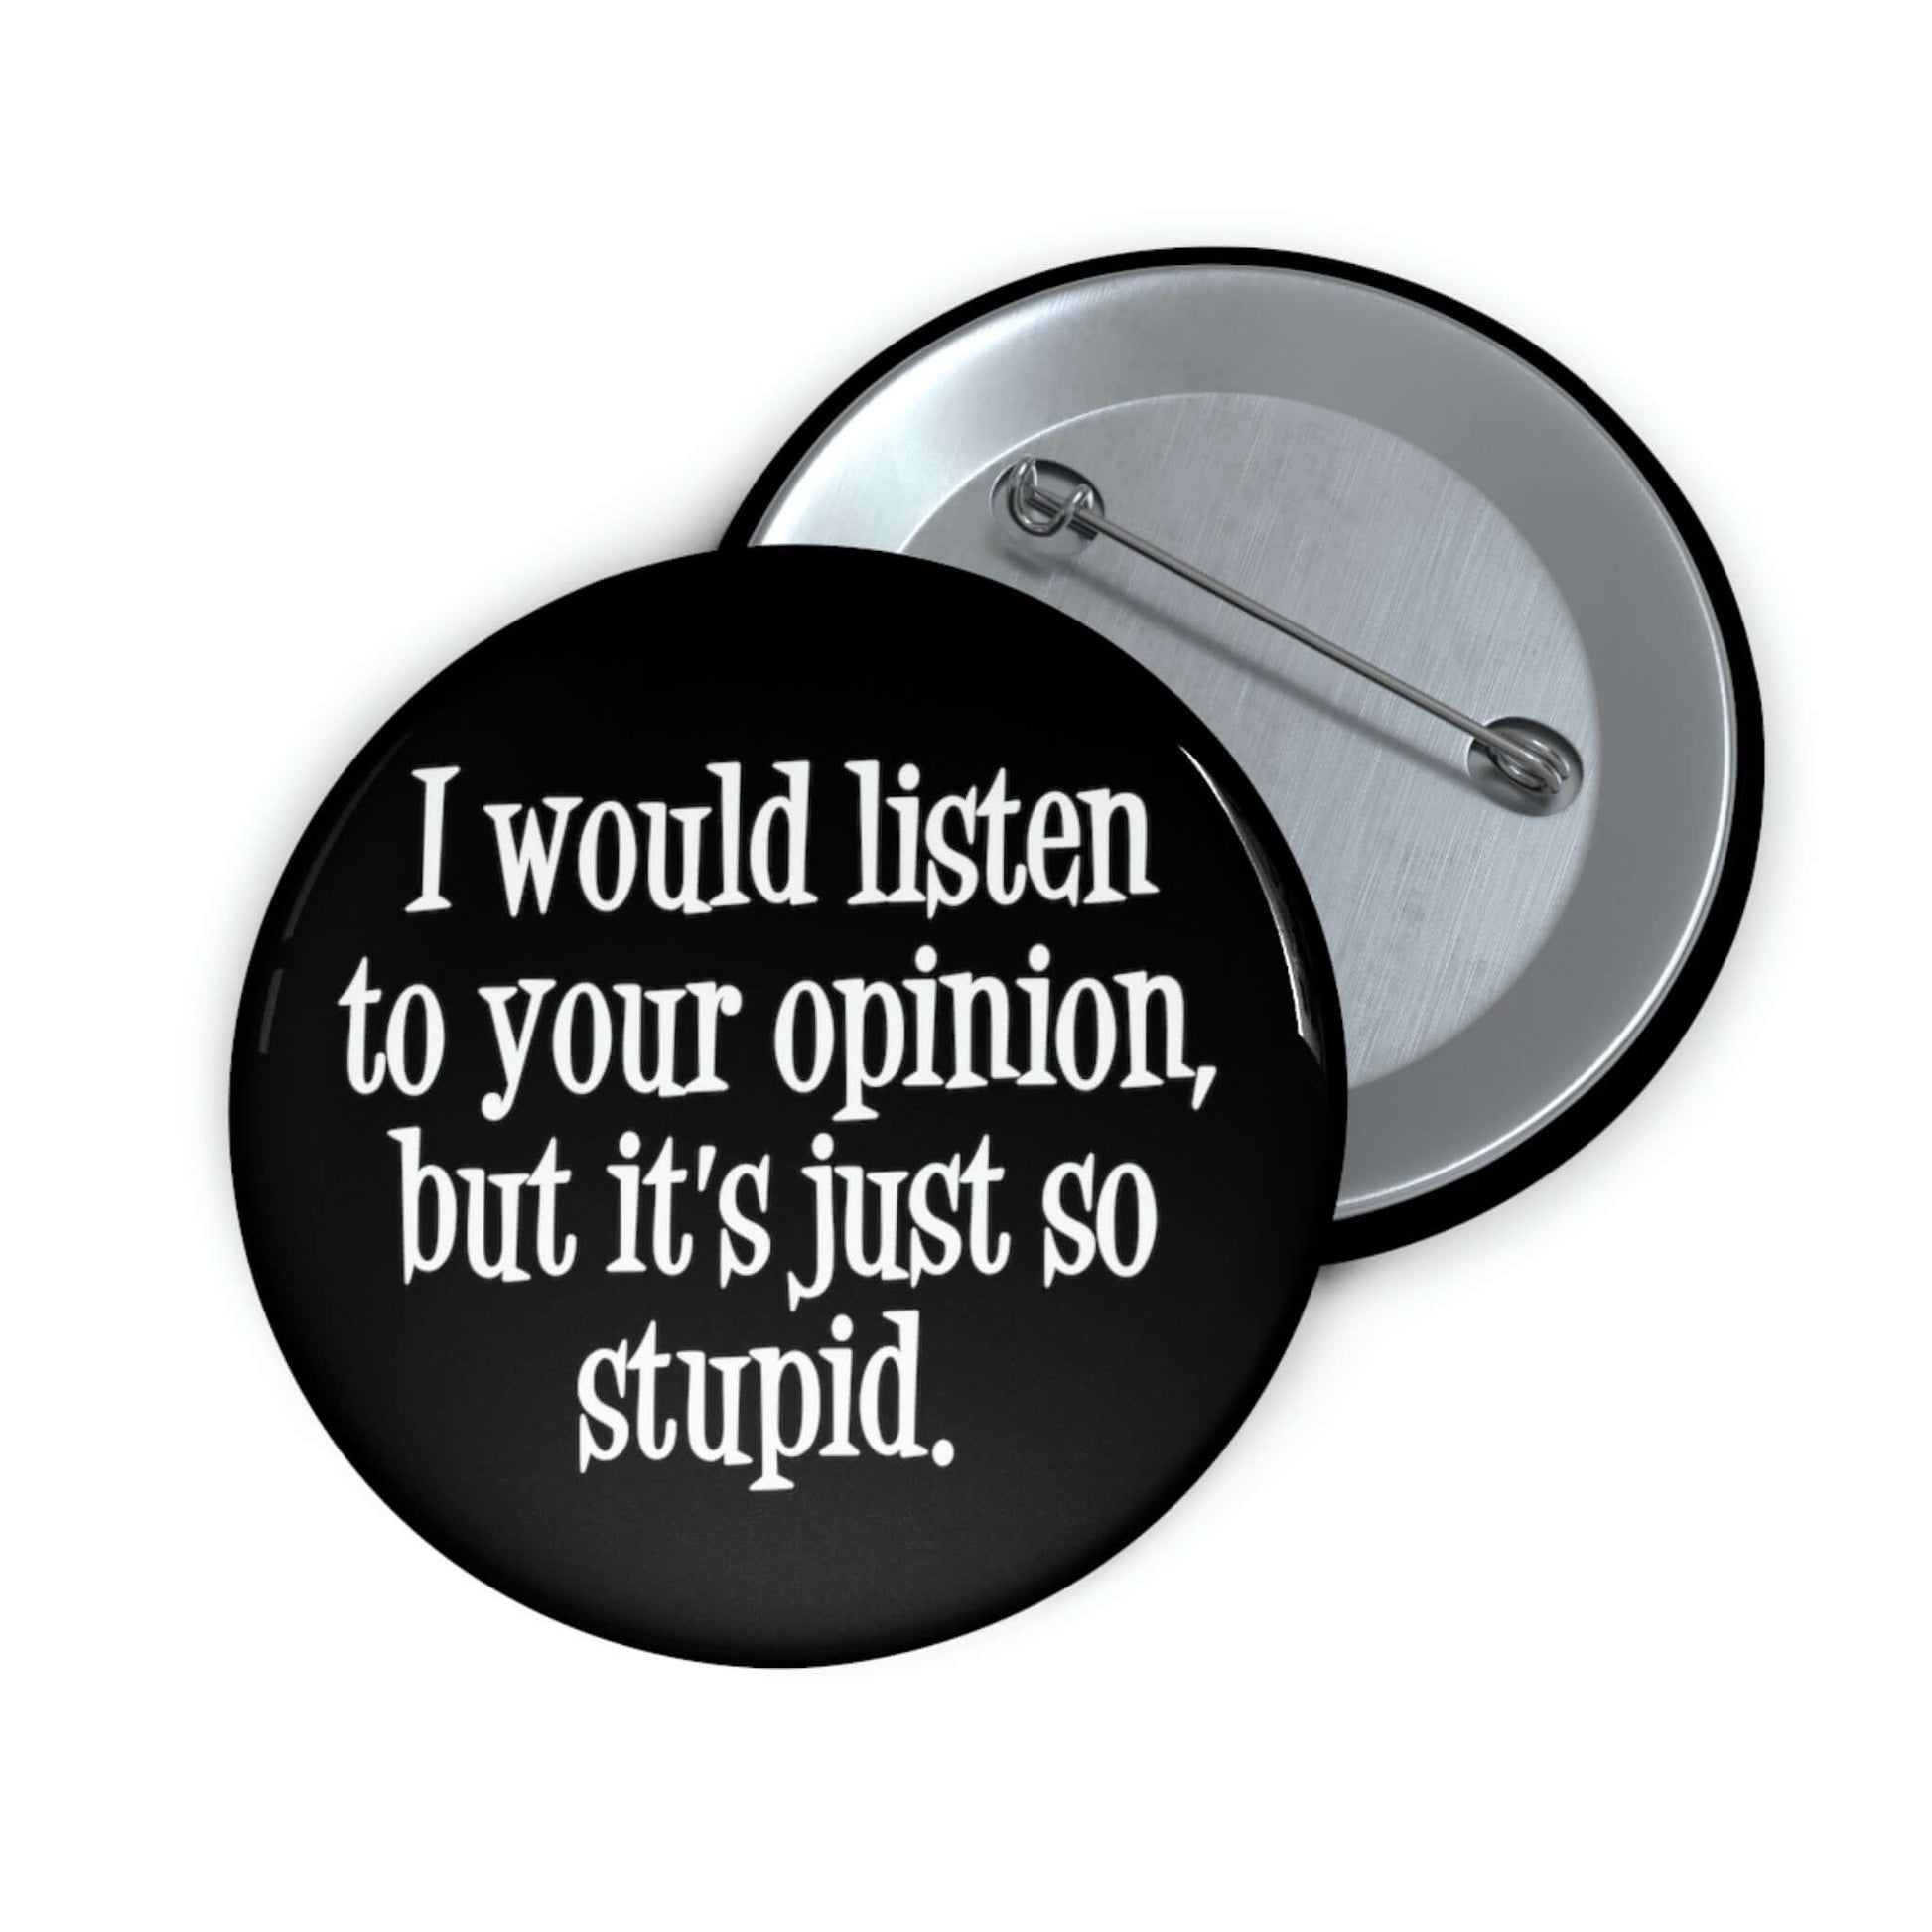 Black pinback button that says I would listen to your opinion but it's just so stupid.